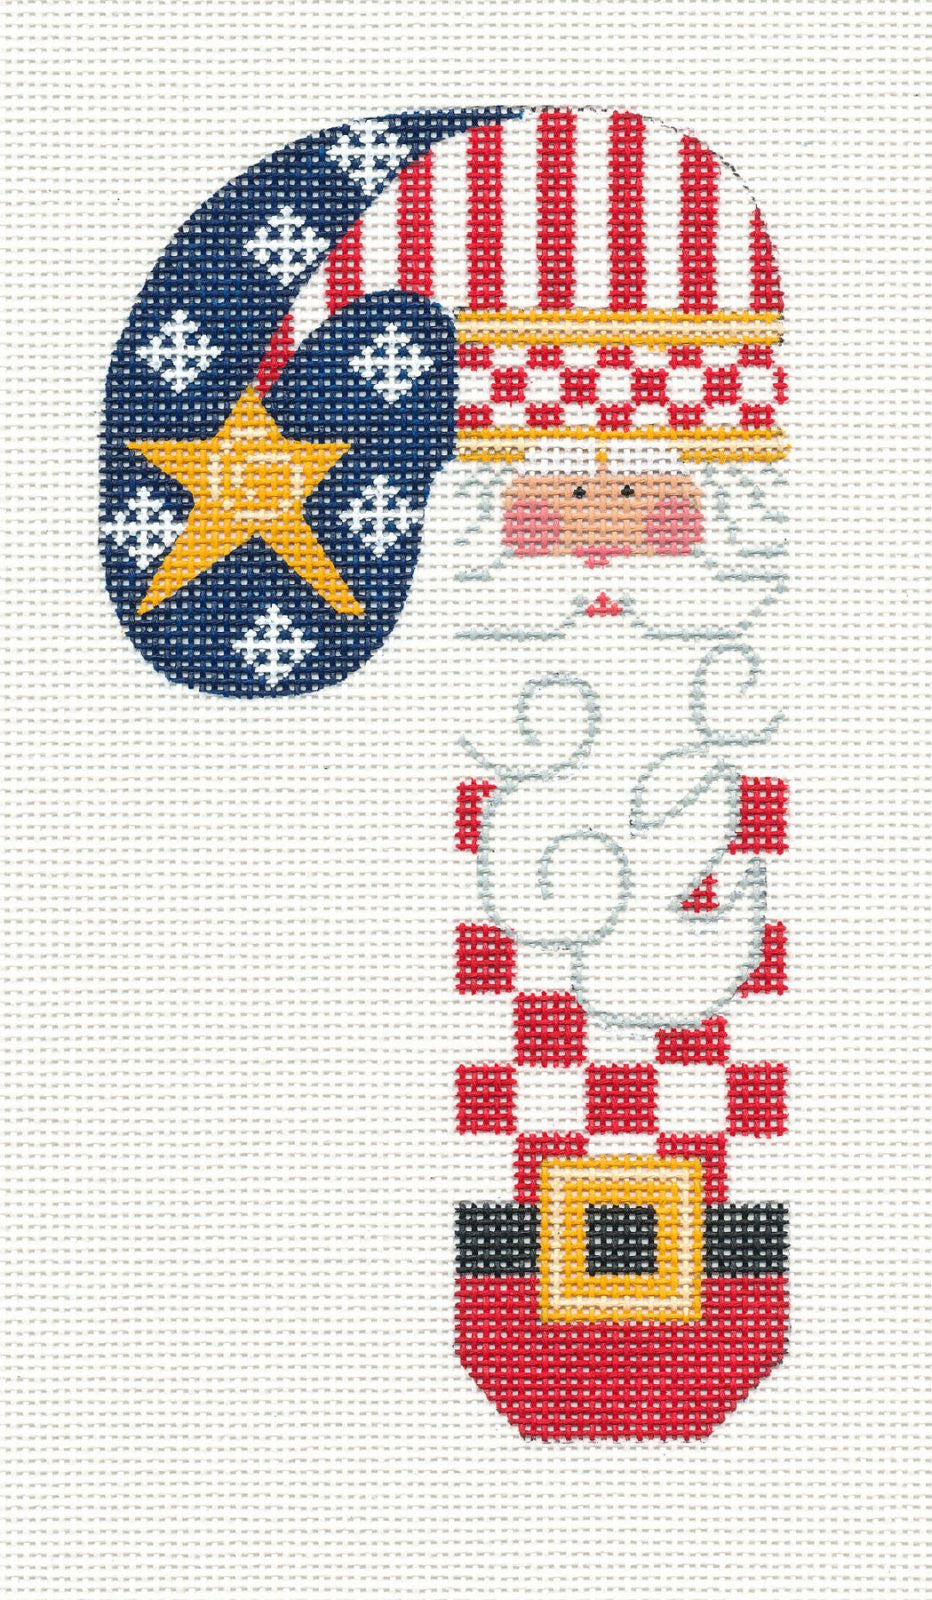 Candy Cane ~ Large Patriotic Santa Red White and Blue Candy Cane Ornament on hand painted Needlepoint Canvas by CH Designs